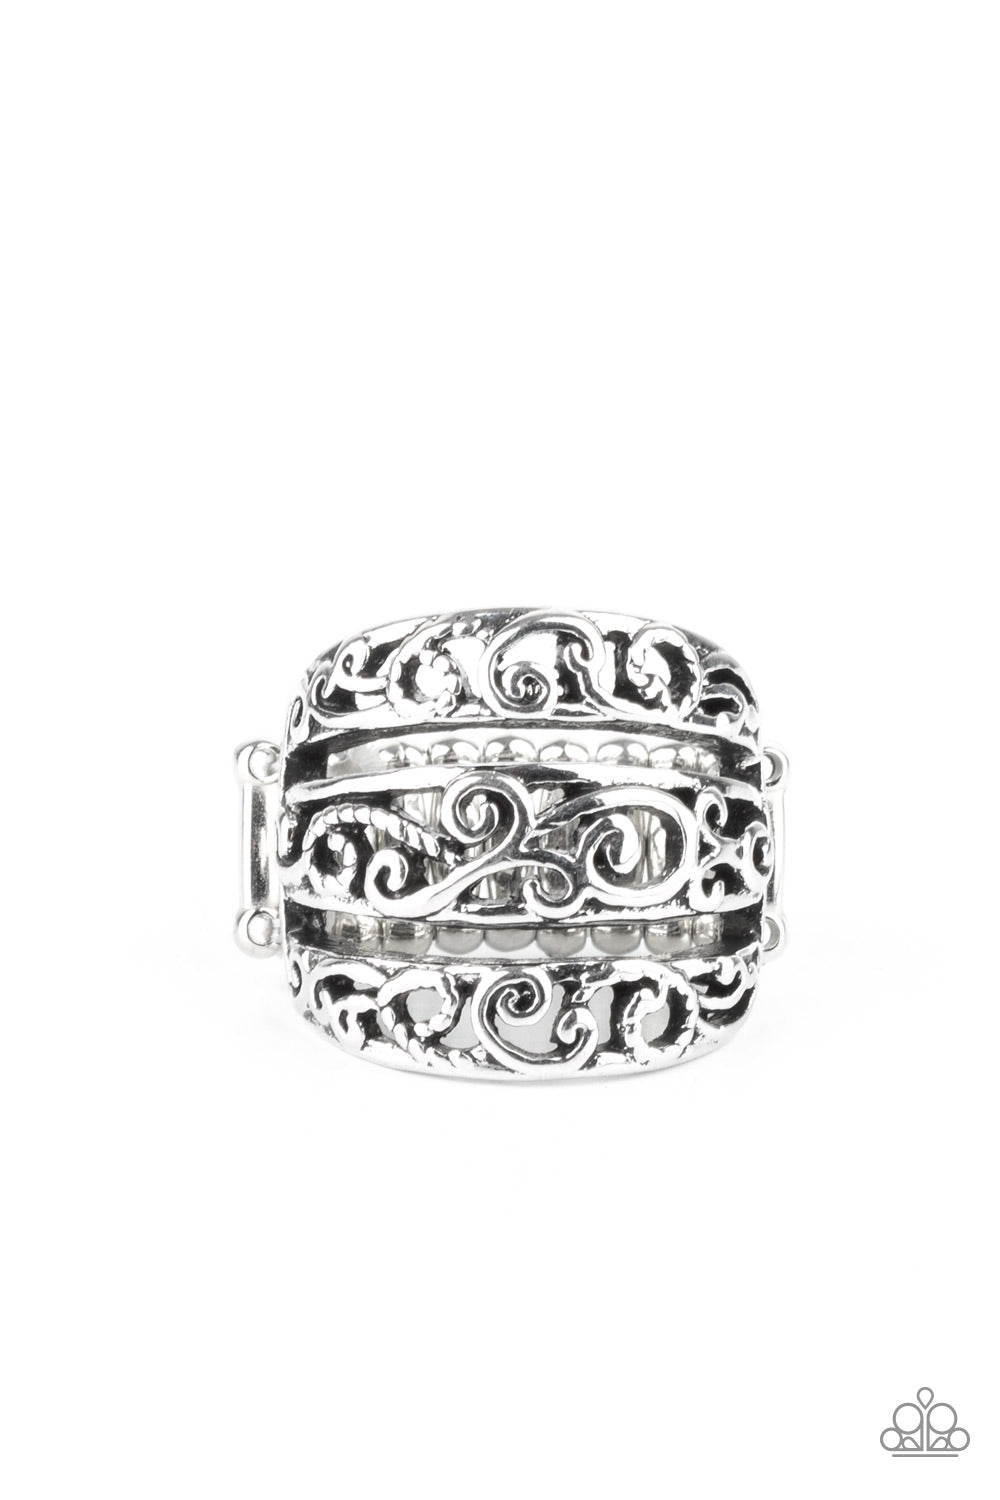 FRILLED To Be Here - silver - Paparazzi ring